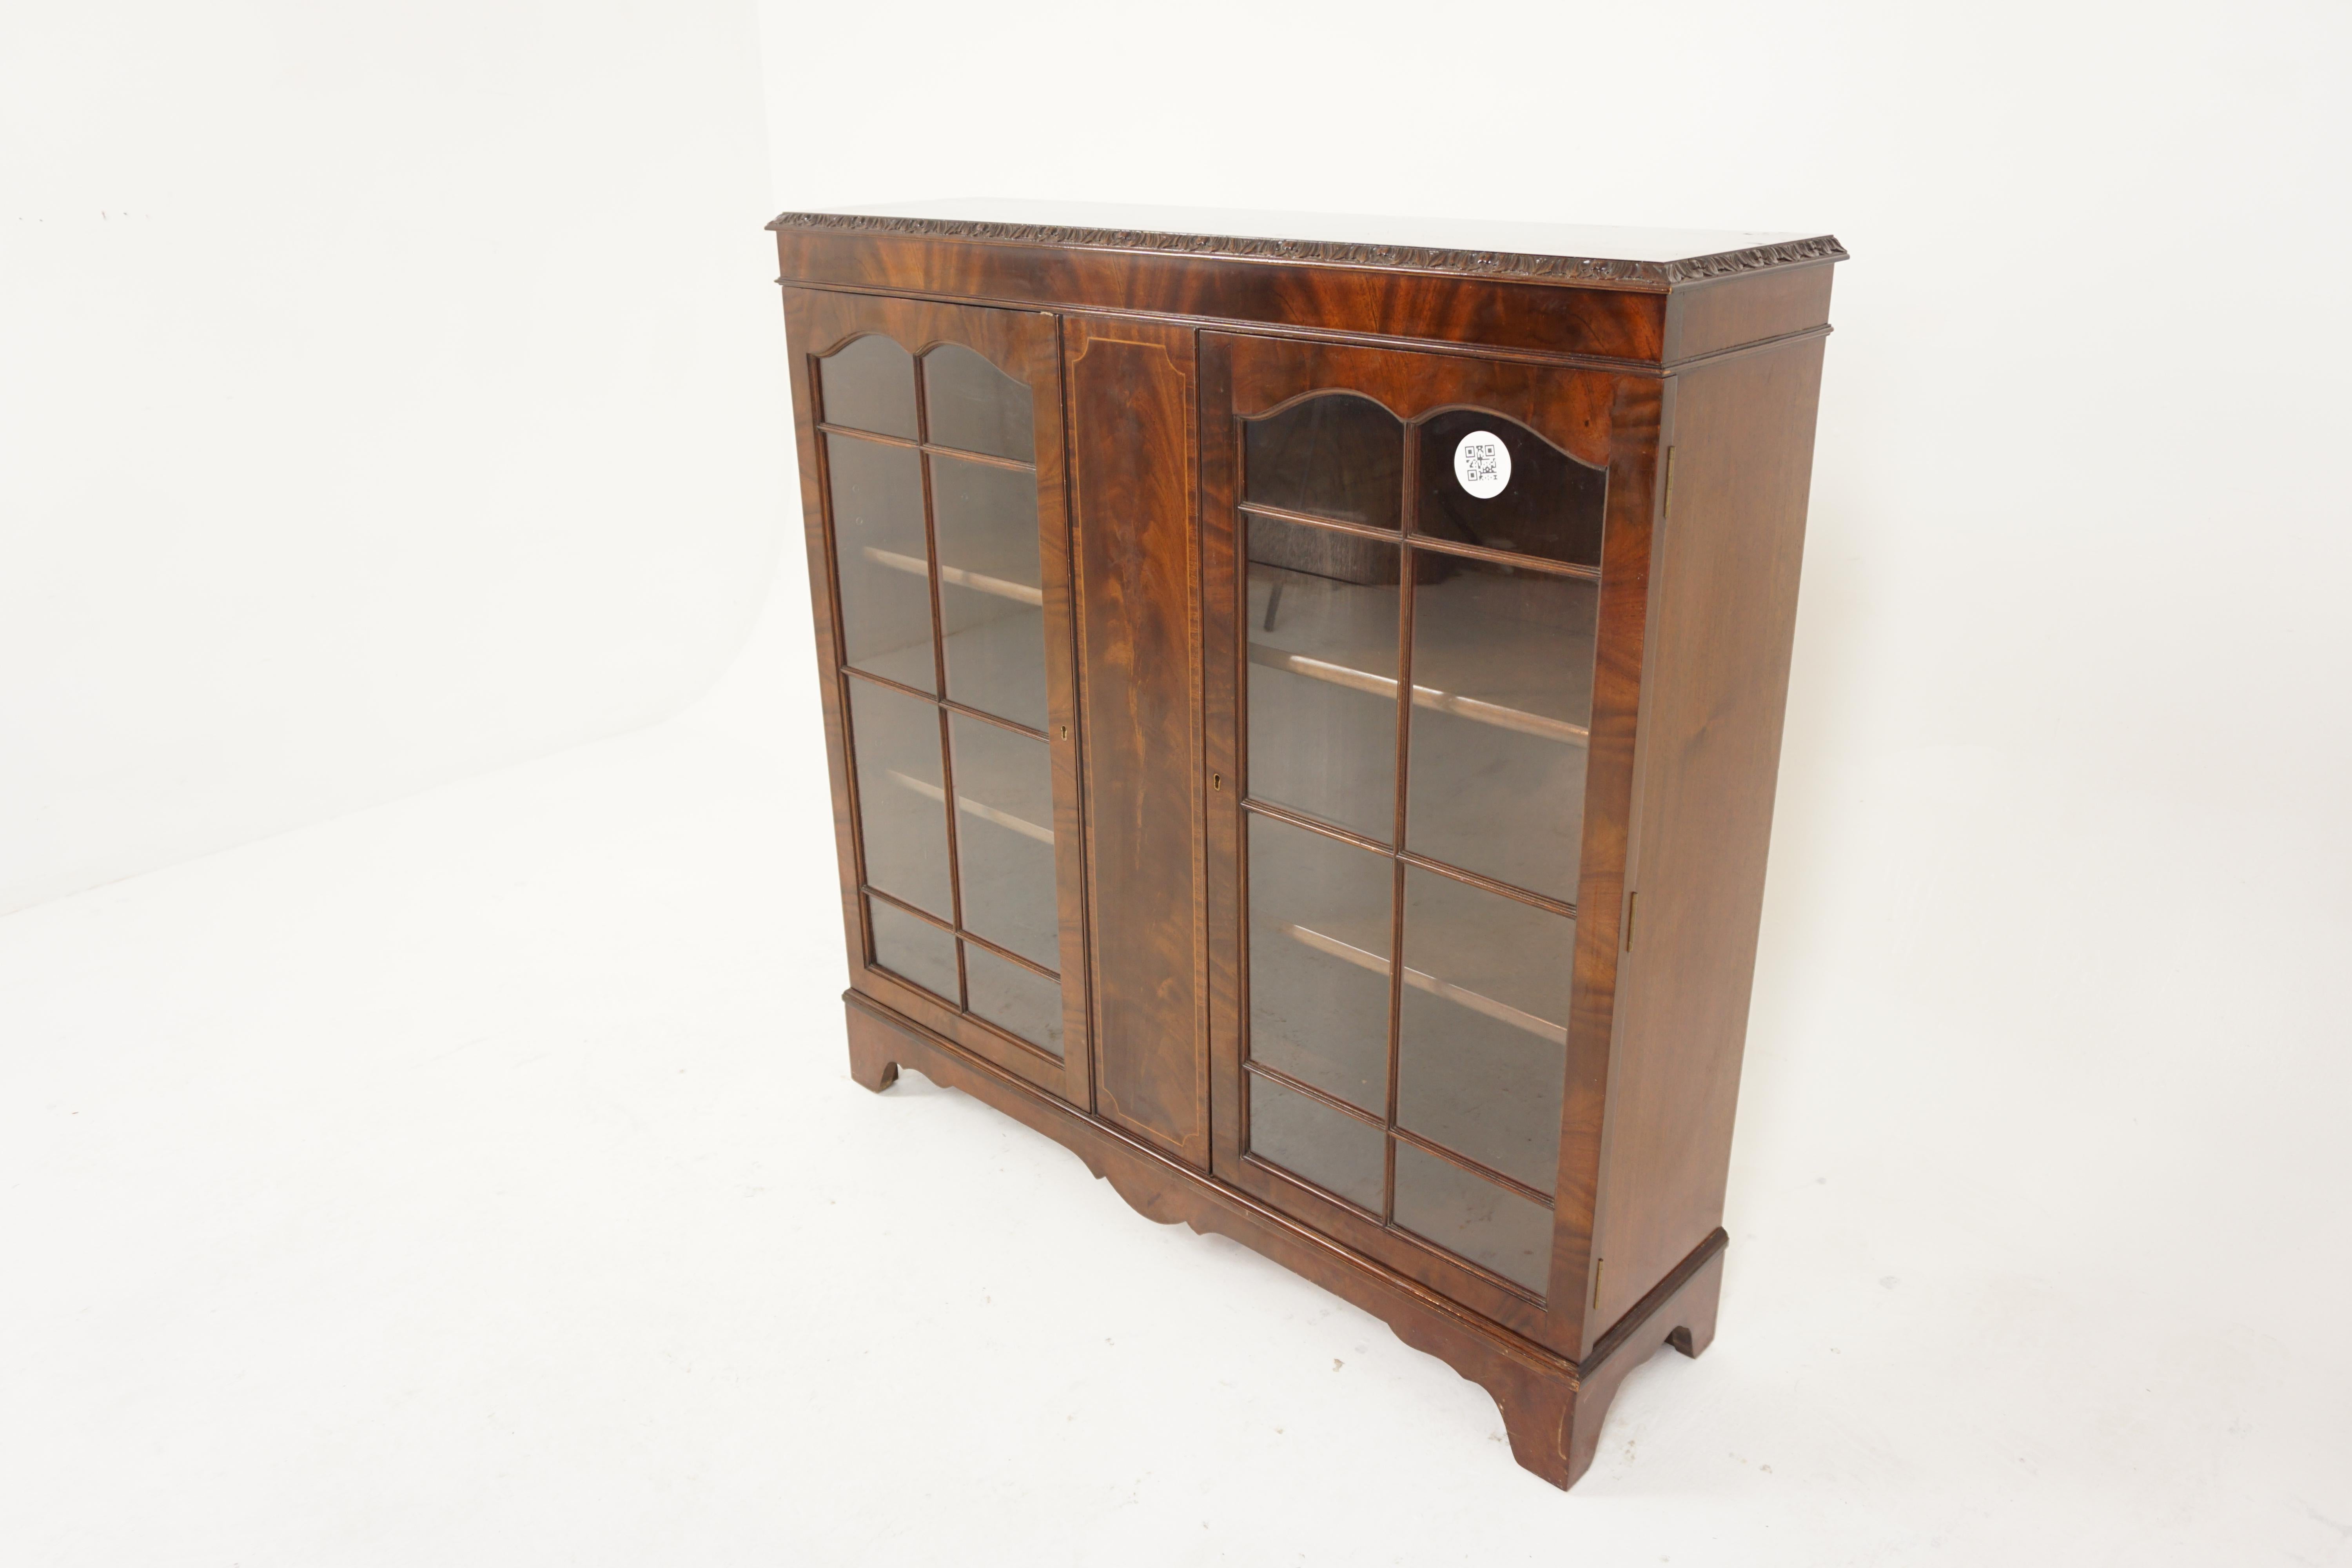 Vintage Inlaid Burr Walnut Two Door Display Cabinet, Bookcase, Scotland 1930, H869

Solid walnut + veneers
Original Finish
Rectangular top with carved moulded edge and inlay
Center panel with satinwood inlay
Flanked by a pair of original glass doors